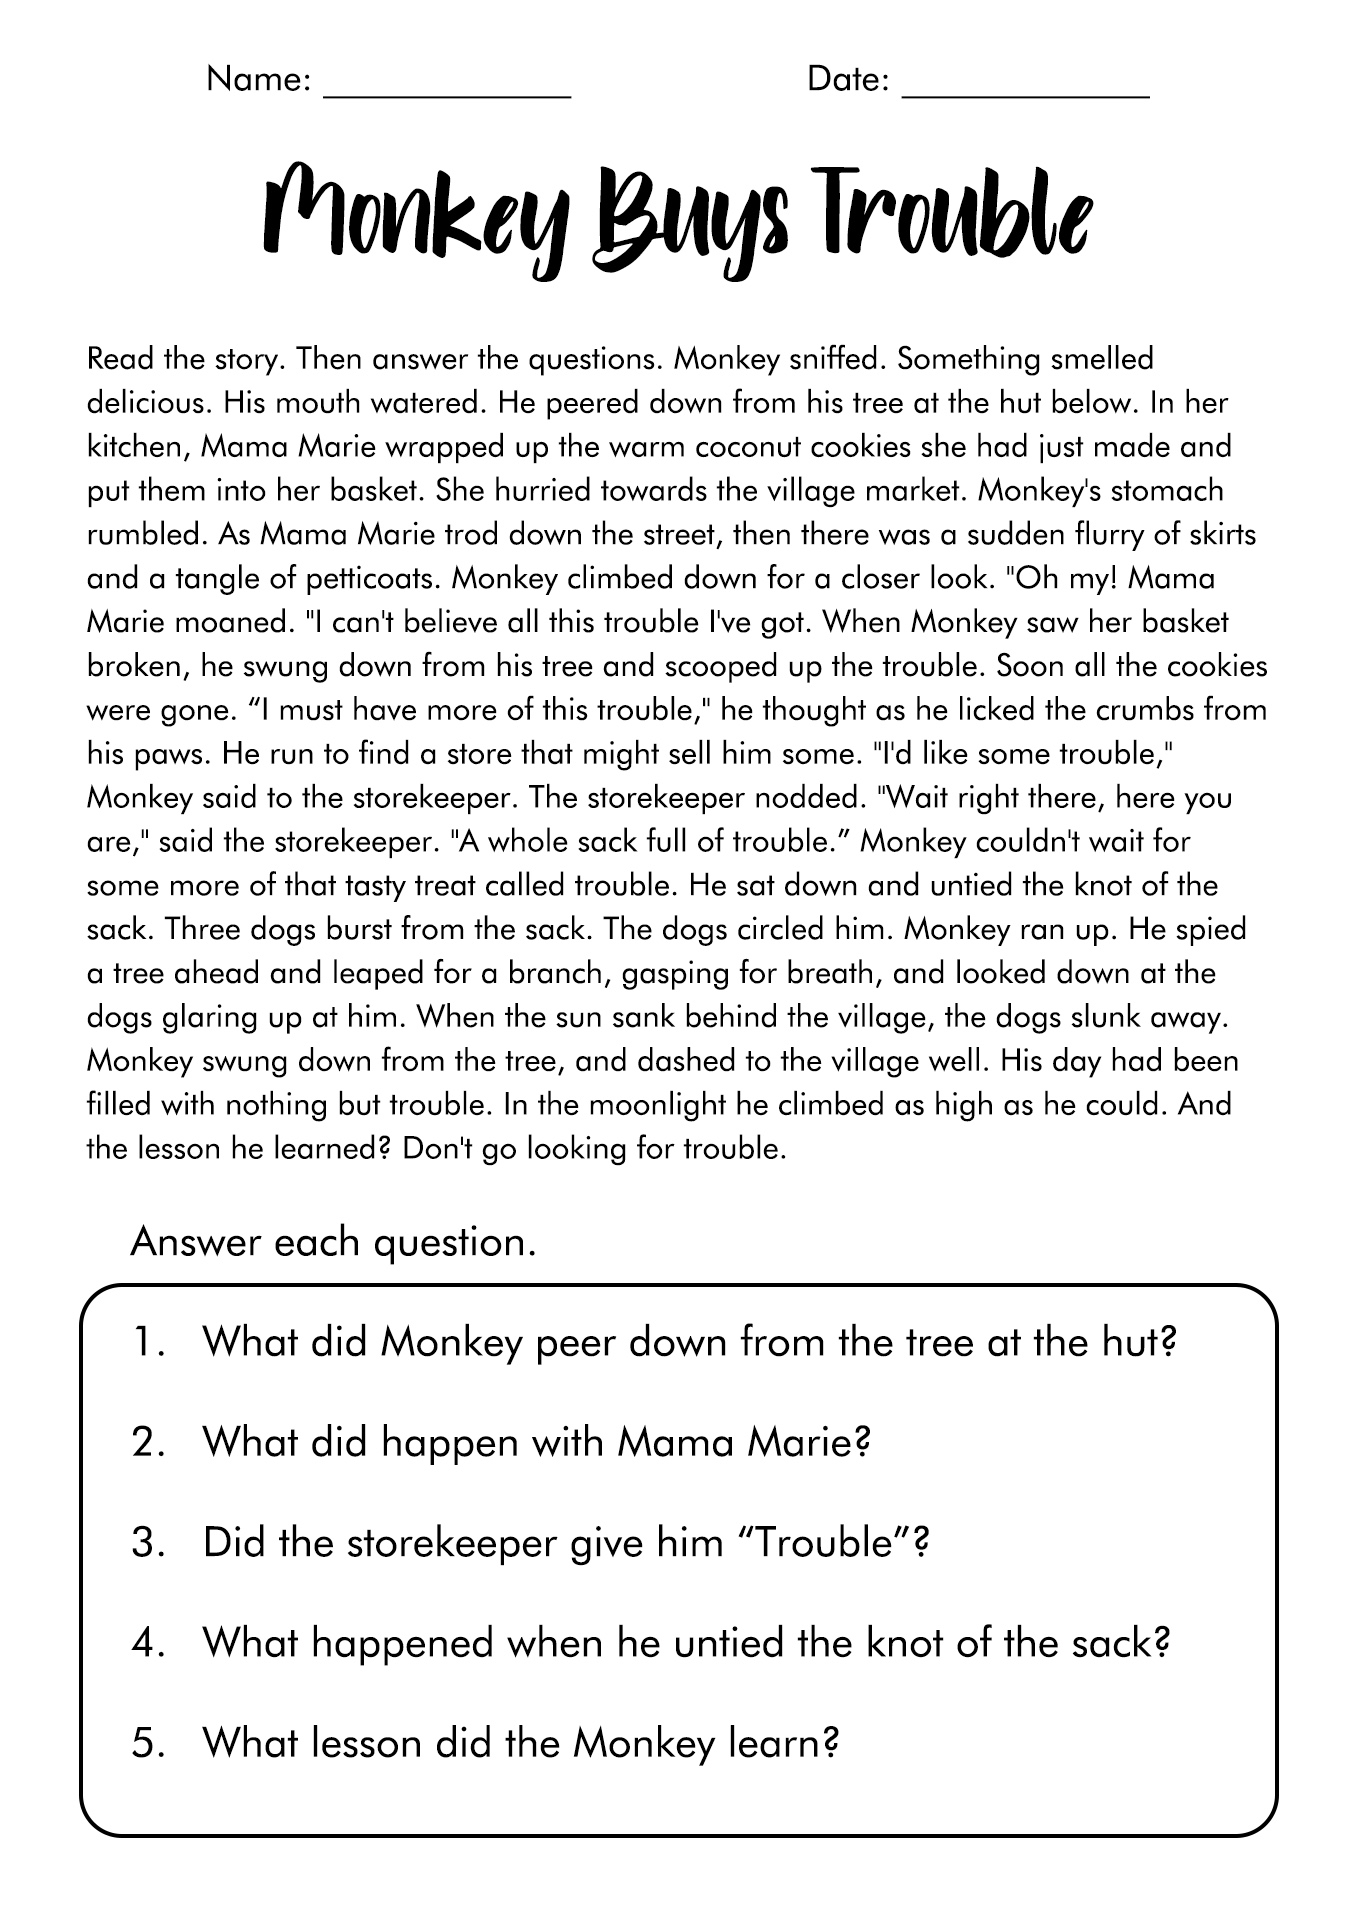 17 Best Images Of Reading Response Worksheets 4th Grade Free Printable Reading Response